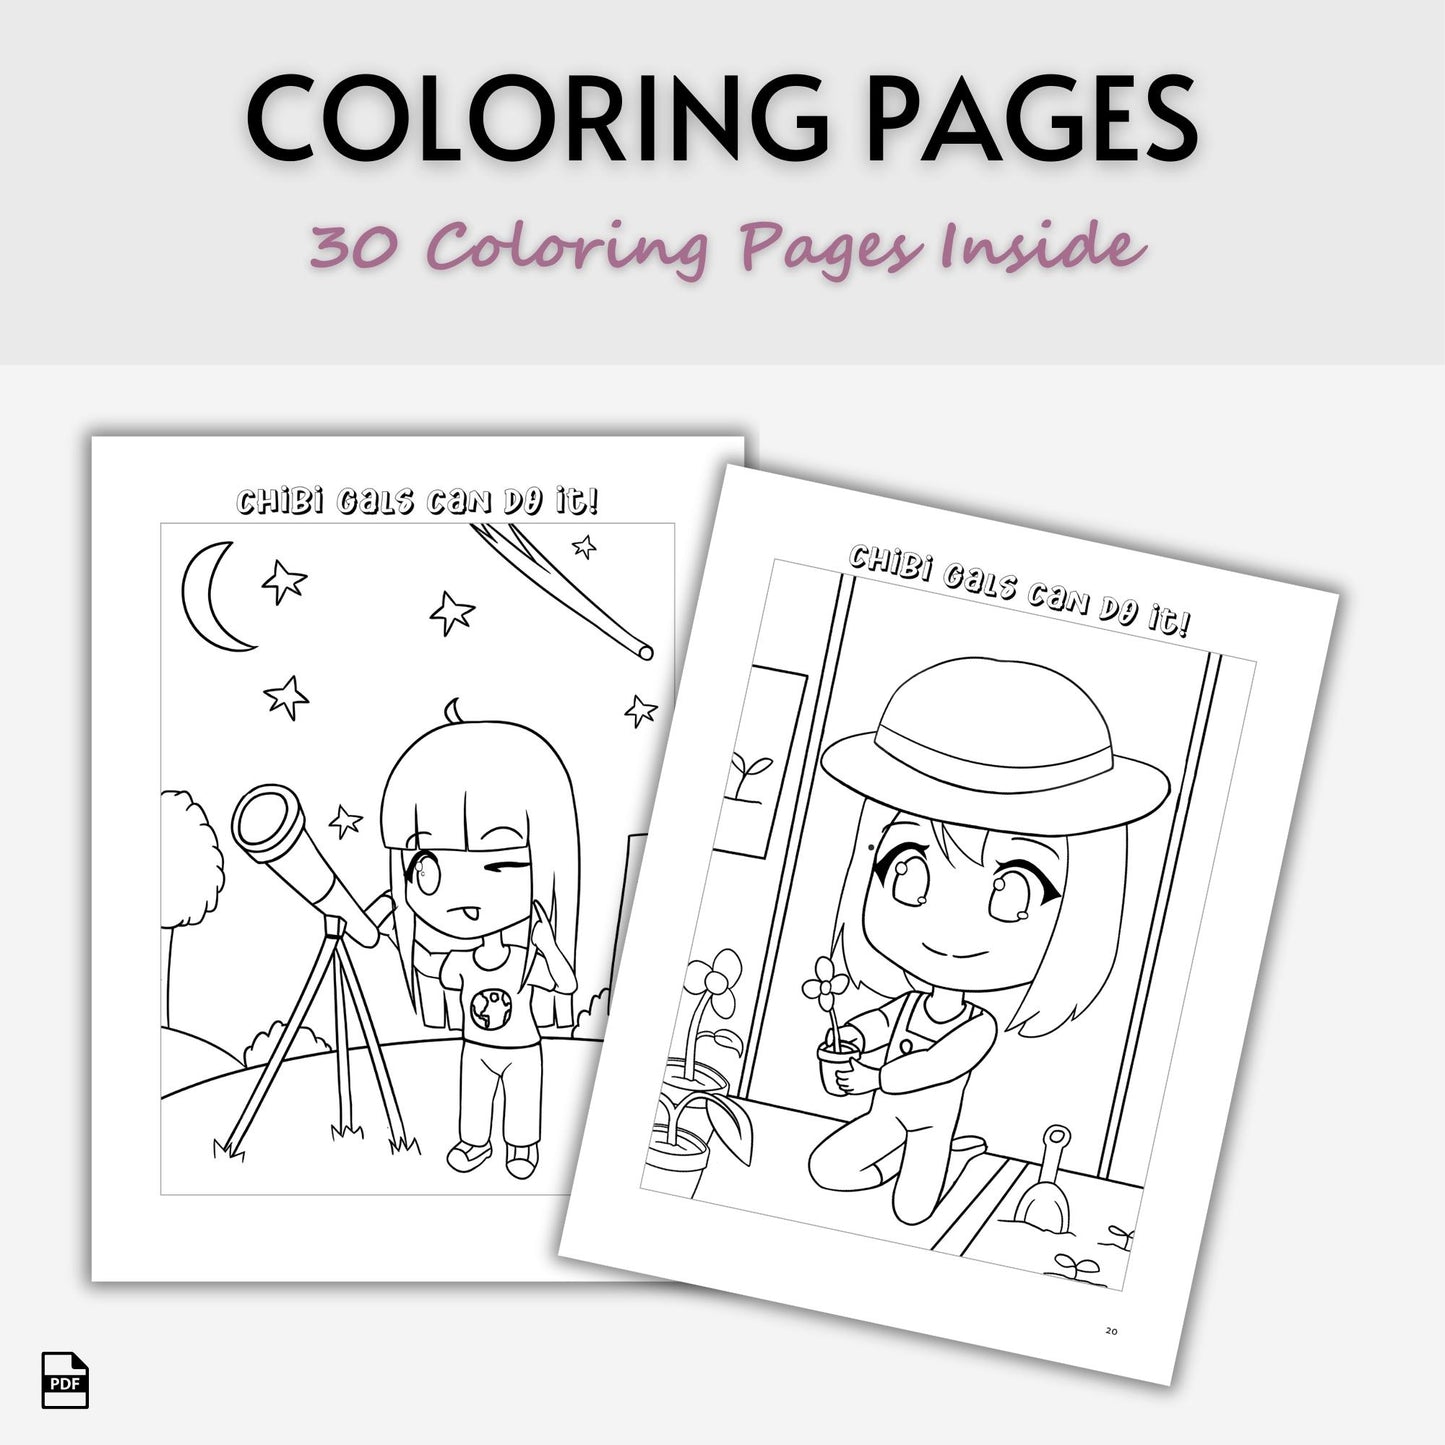 Chibi Gals Can Do It Coloring Book